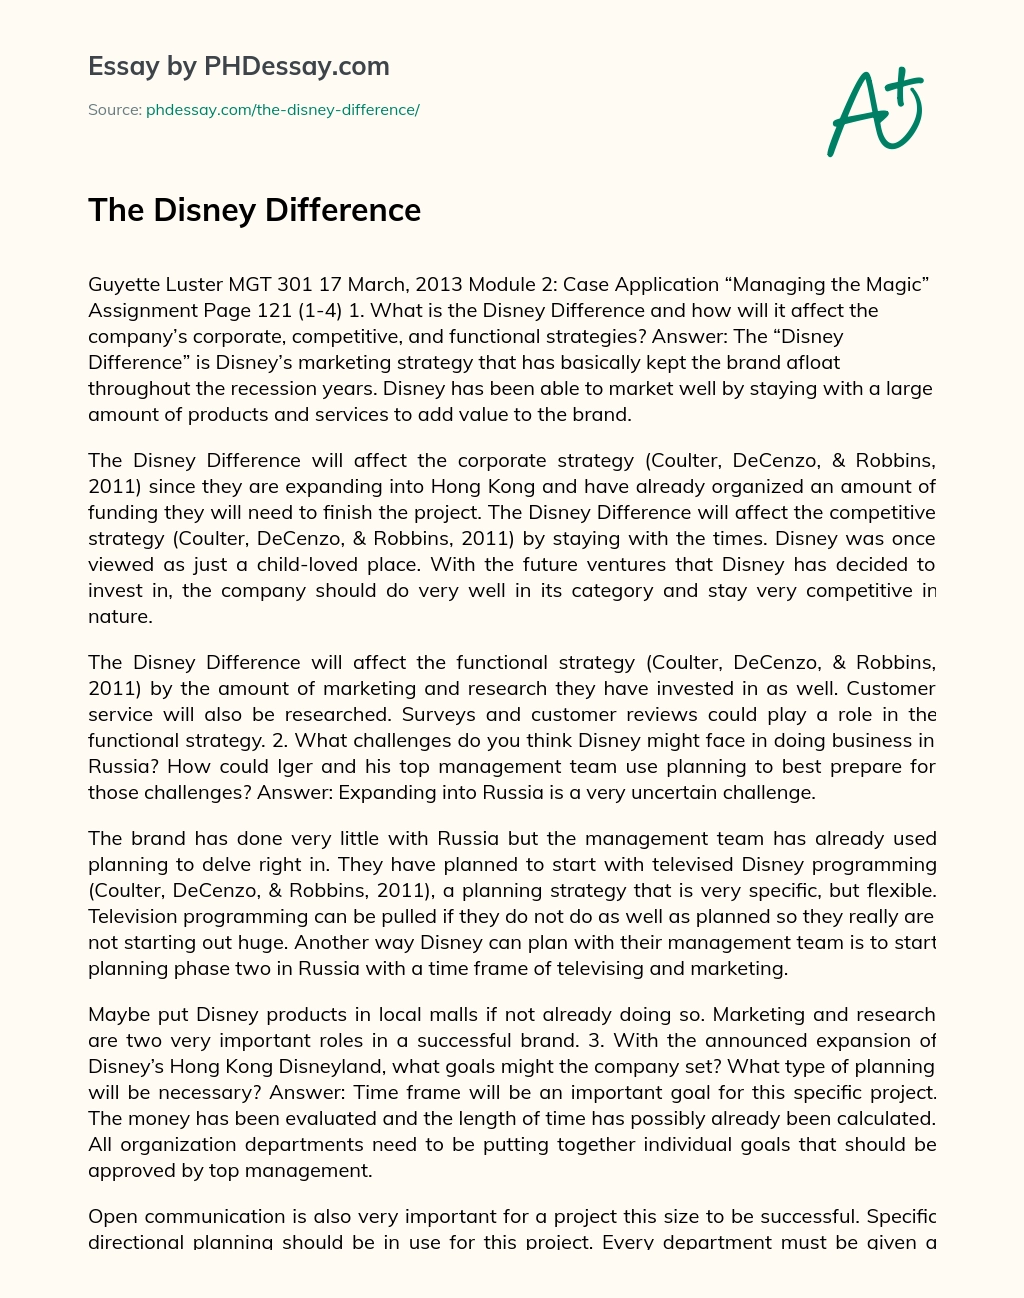 The Disney Difference essay